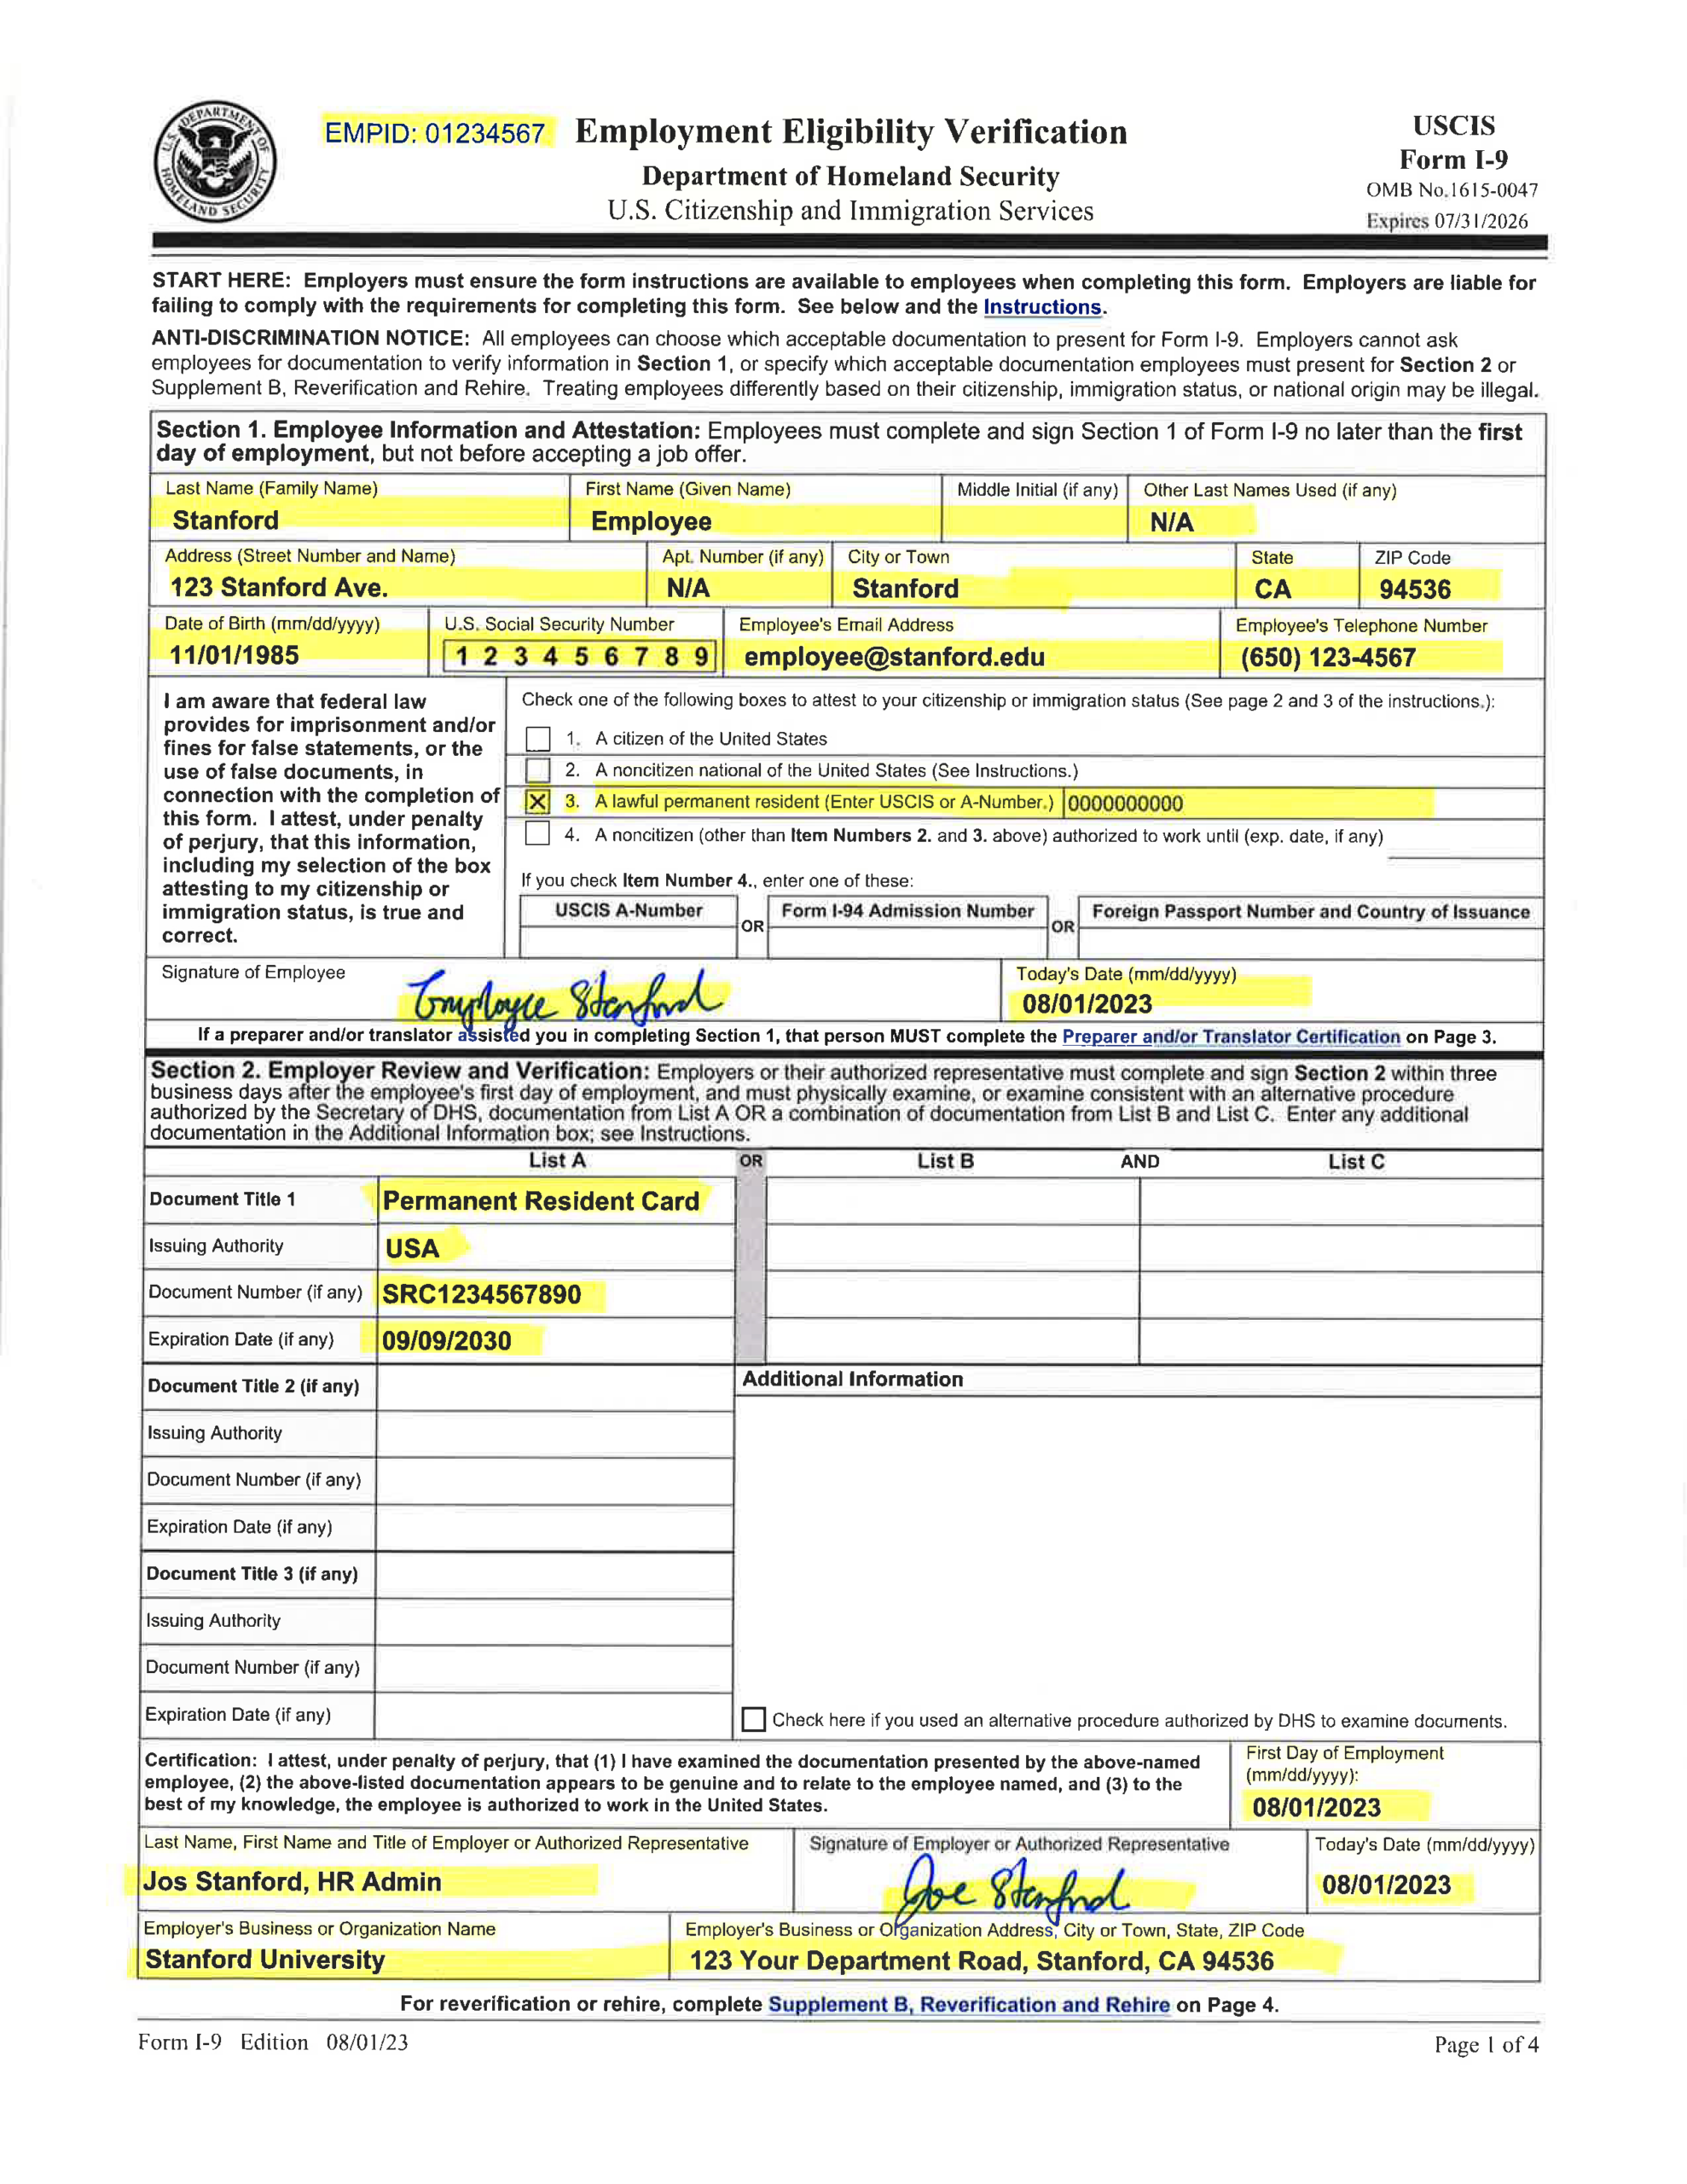 Examples Of Completed Form I-9 For Stanford inside I-9 Fillable Form